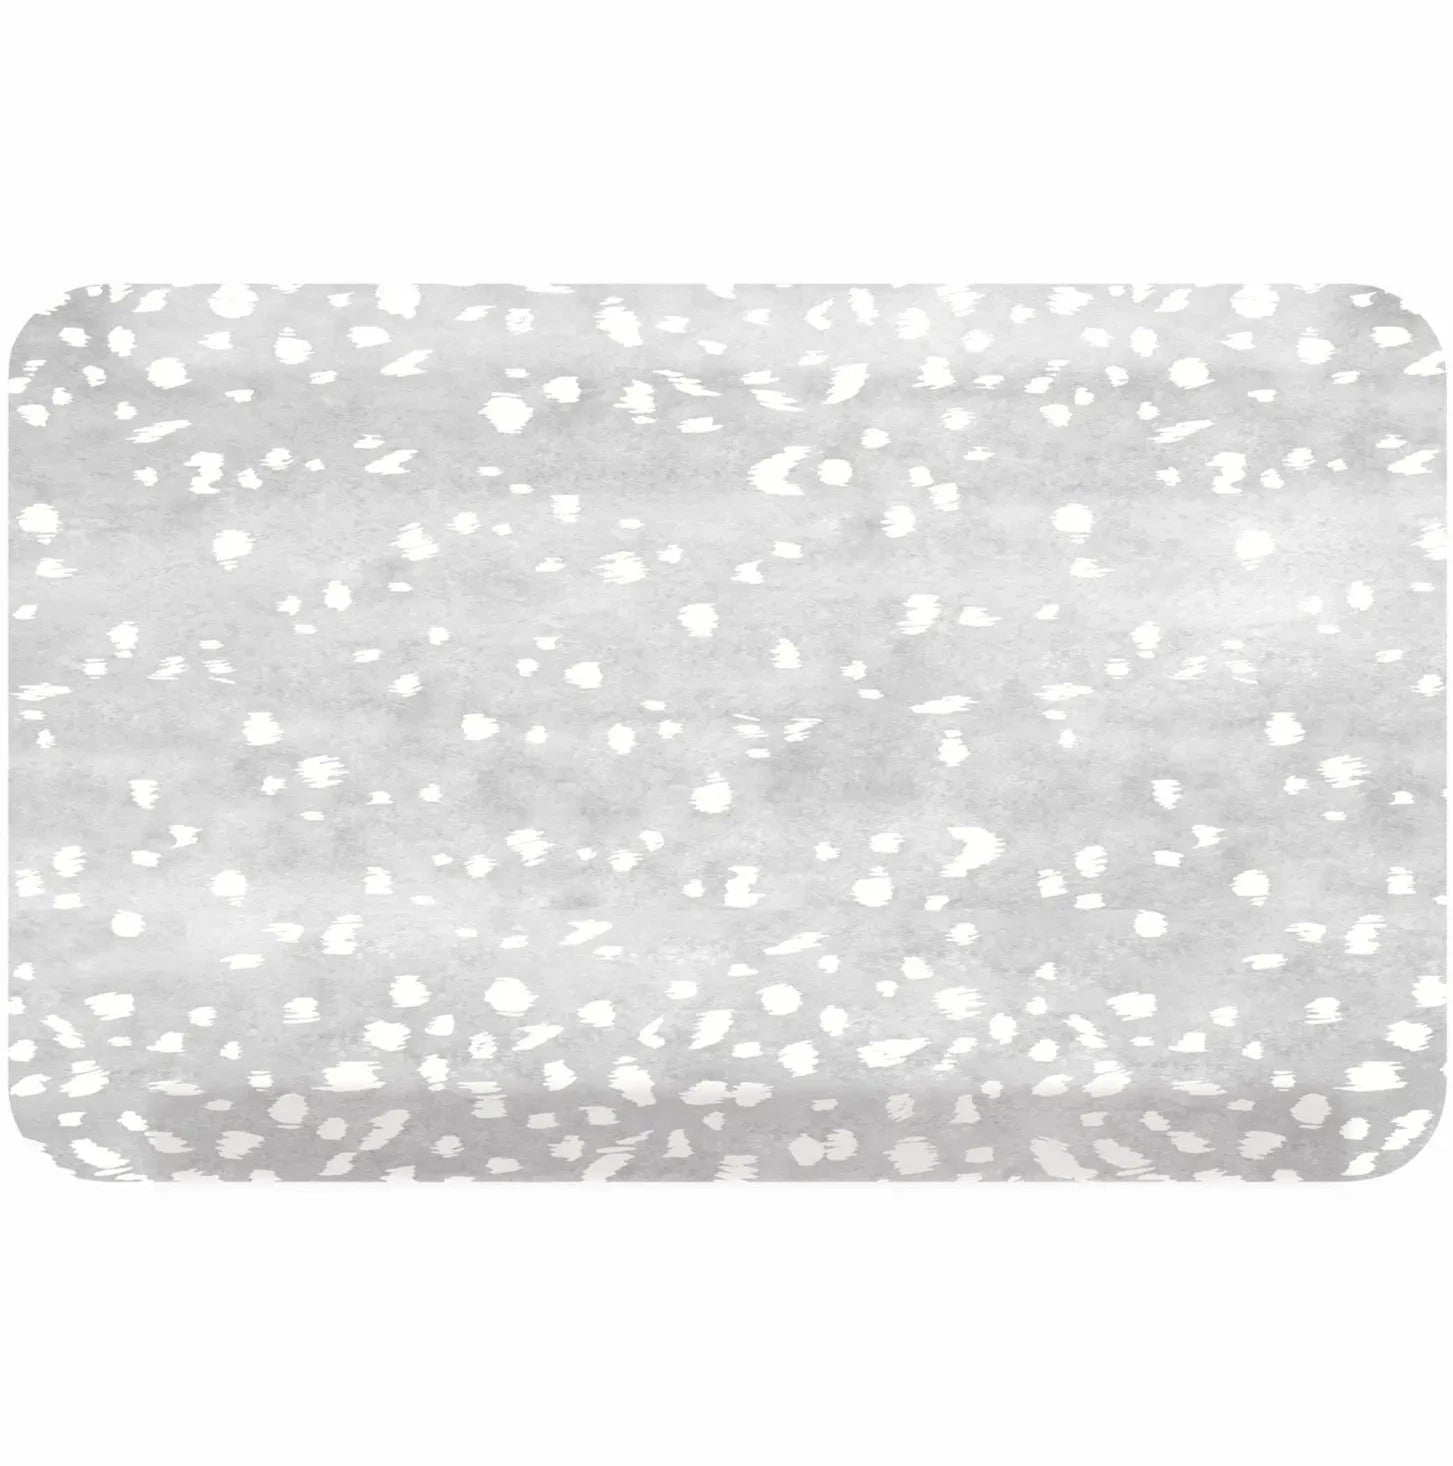 Fawn silver gray animal print kitchen mat shown in size 20x32